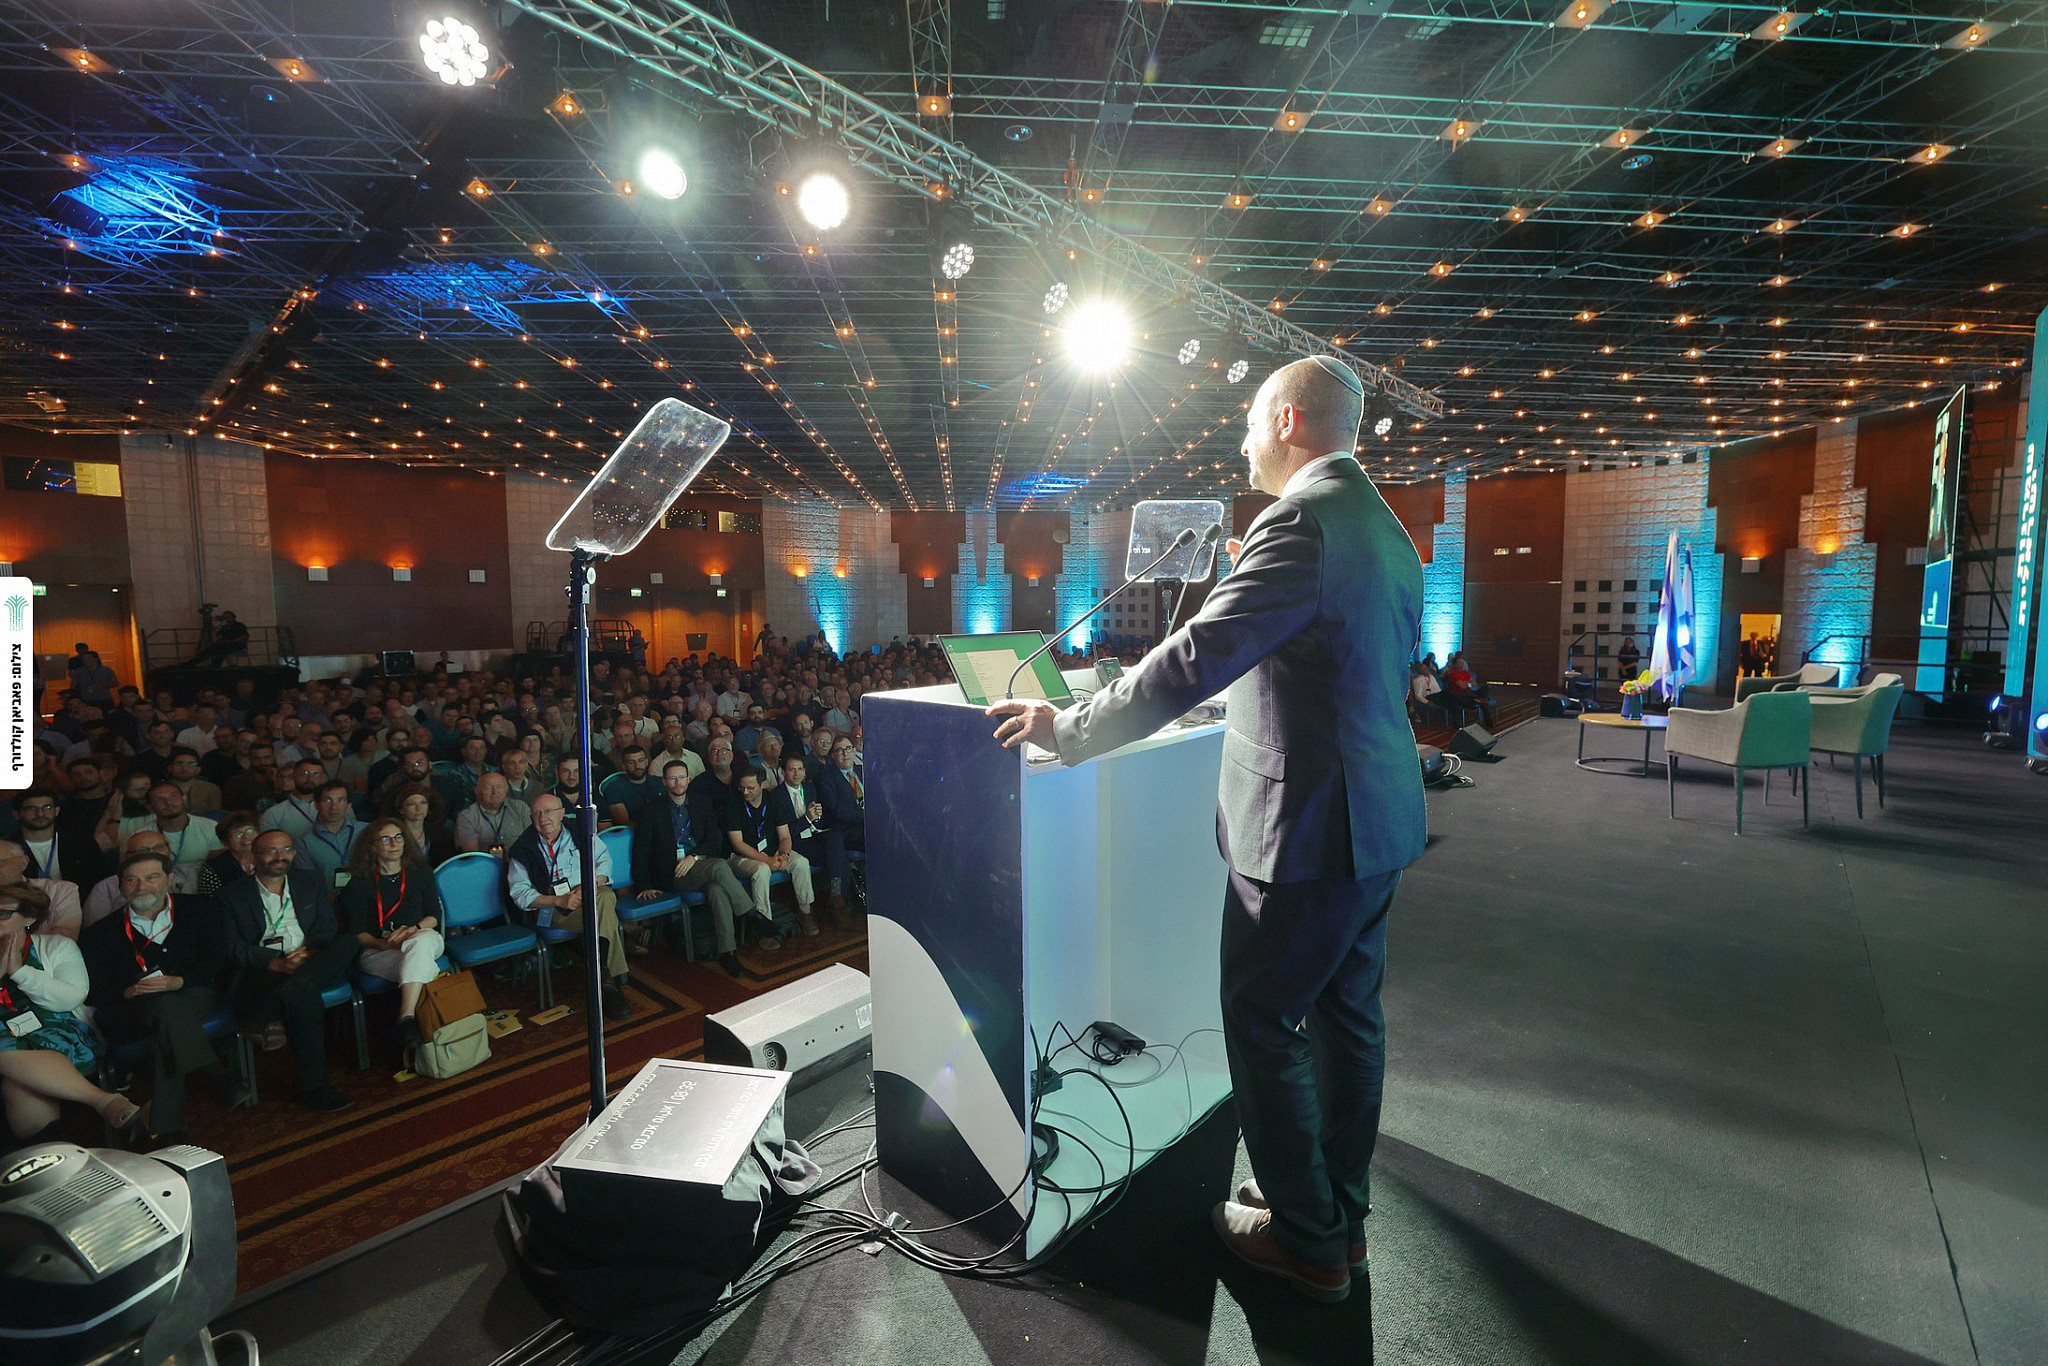 Amiad Cohen, the director general of the Tikvah Fund in Israel, delivers a speech during the Israeli Conservatism Conference, Jerusalem, May 26, 2022. (Fabian Koldorff)